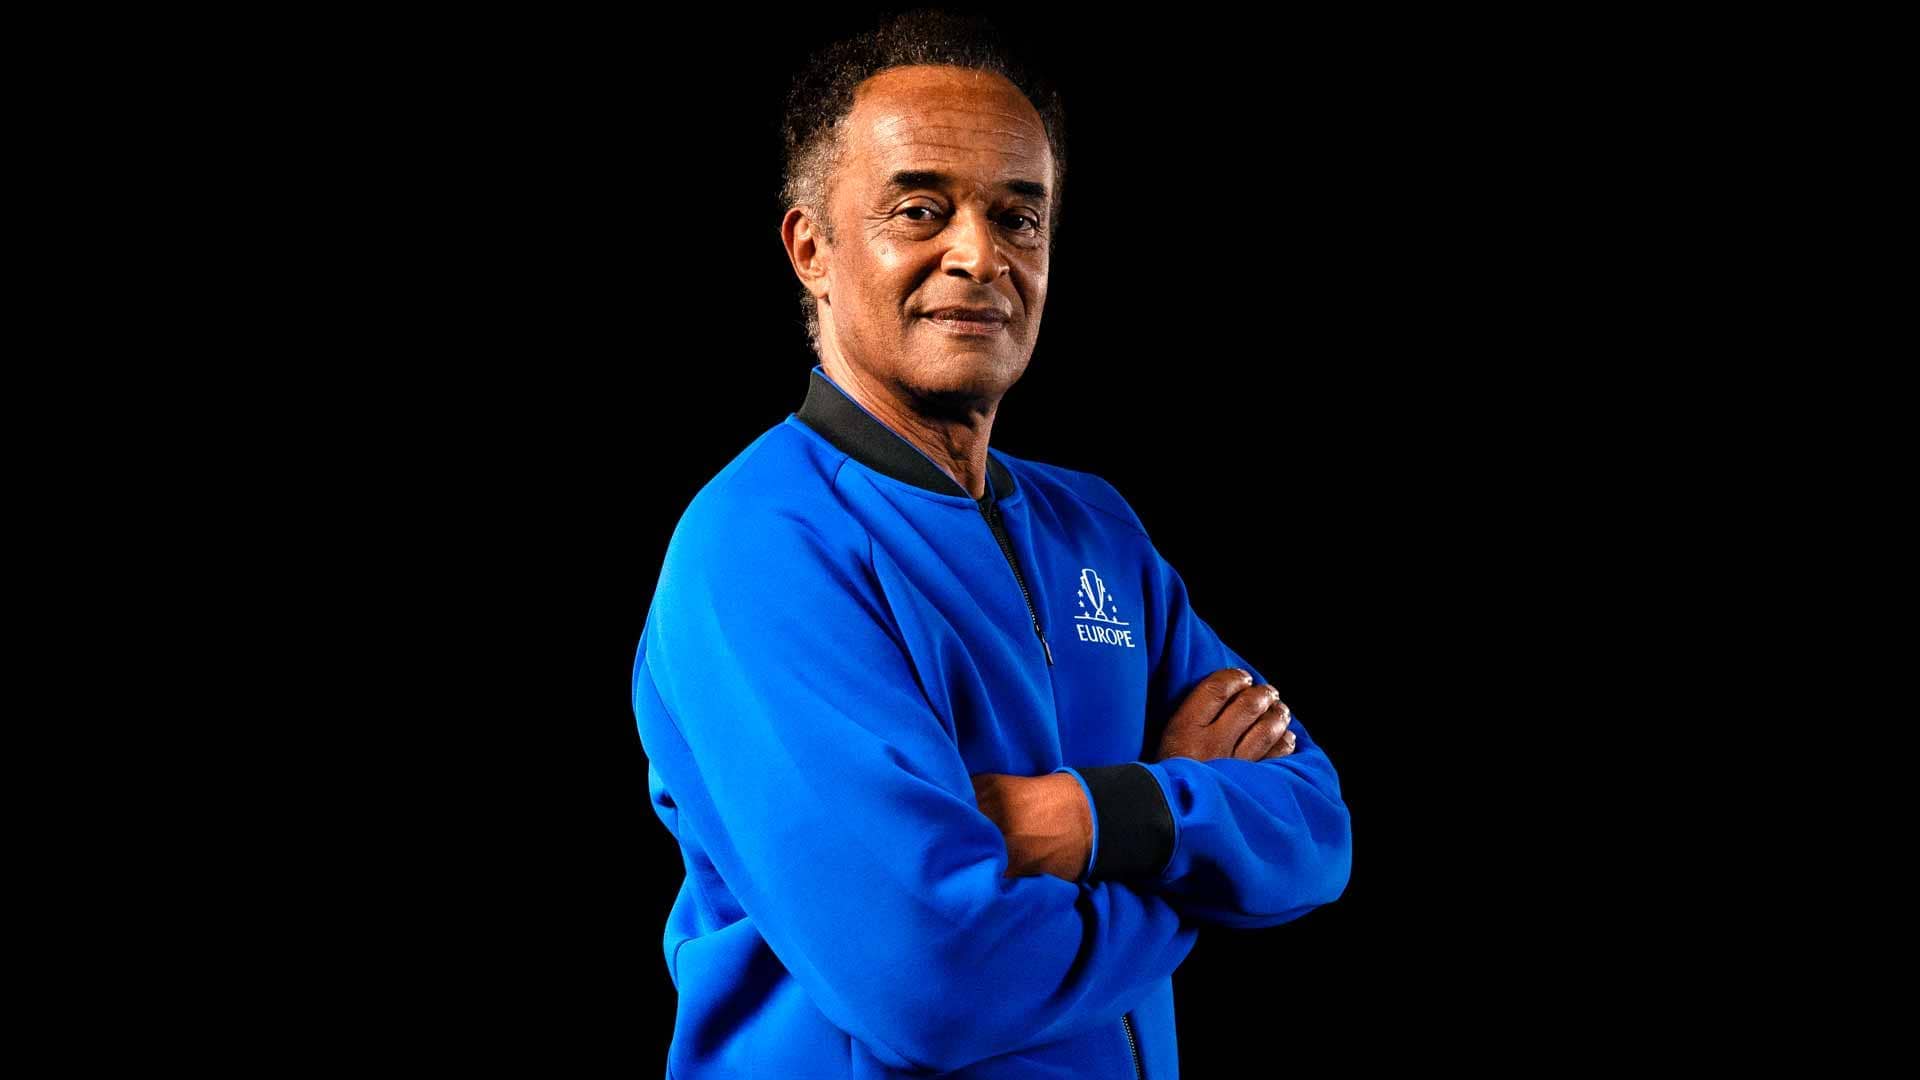 Yannick Noah to become Team Europe Captain for Laver Cup in 2025